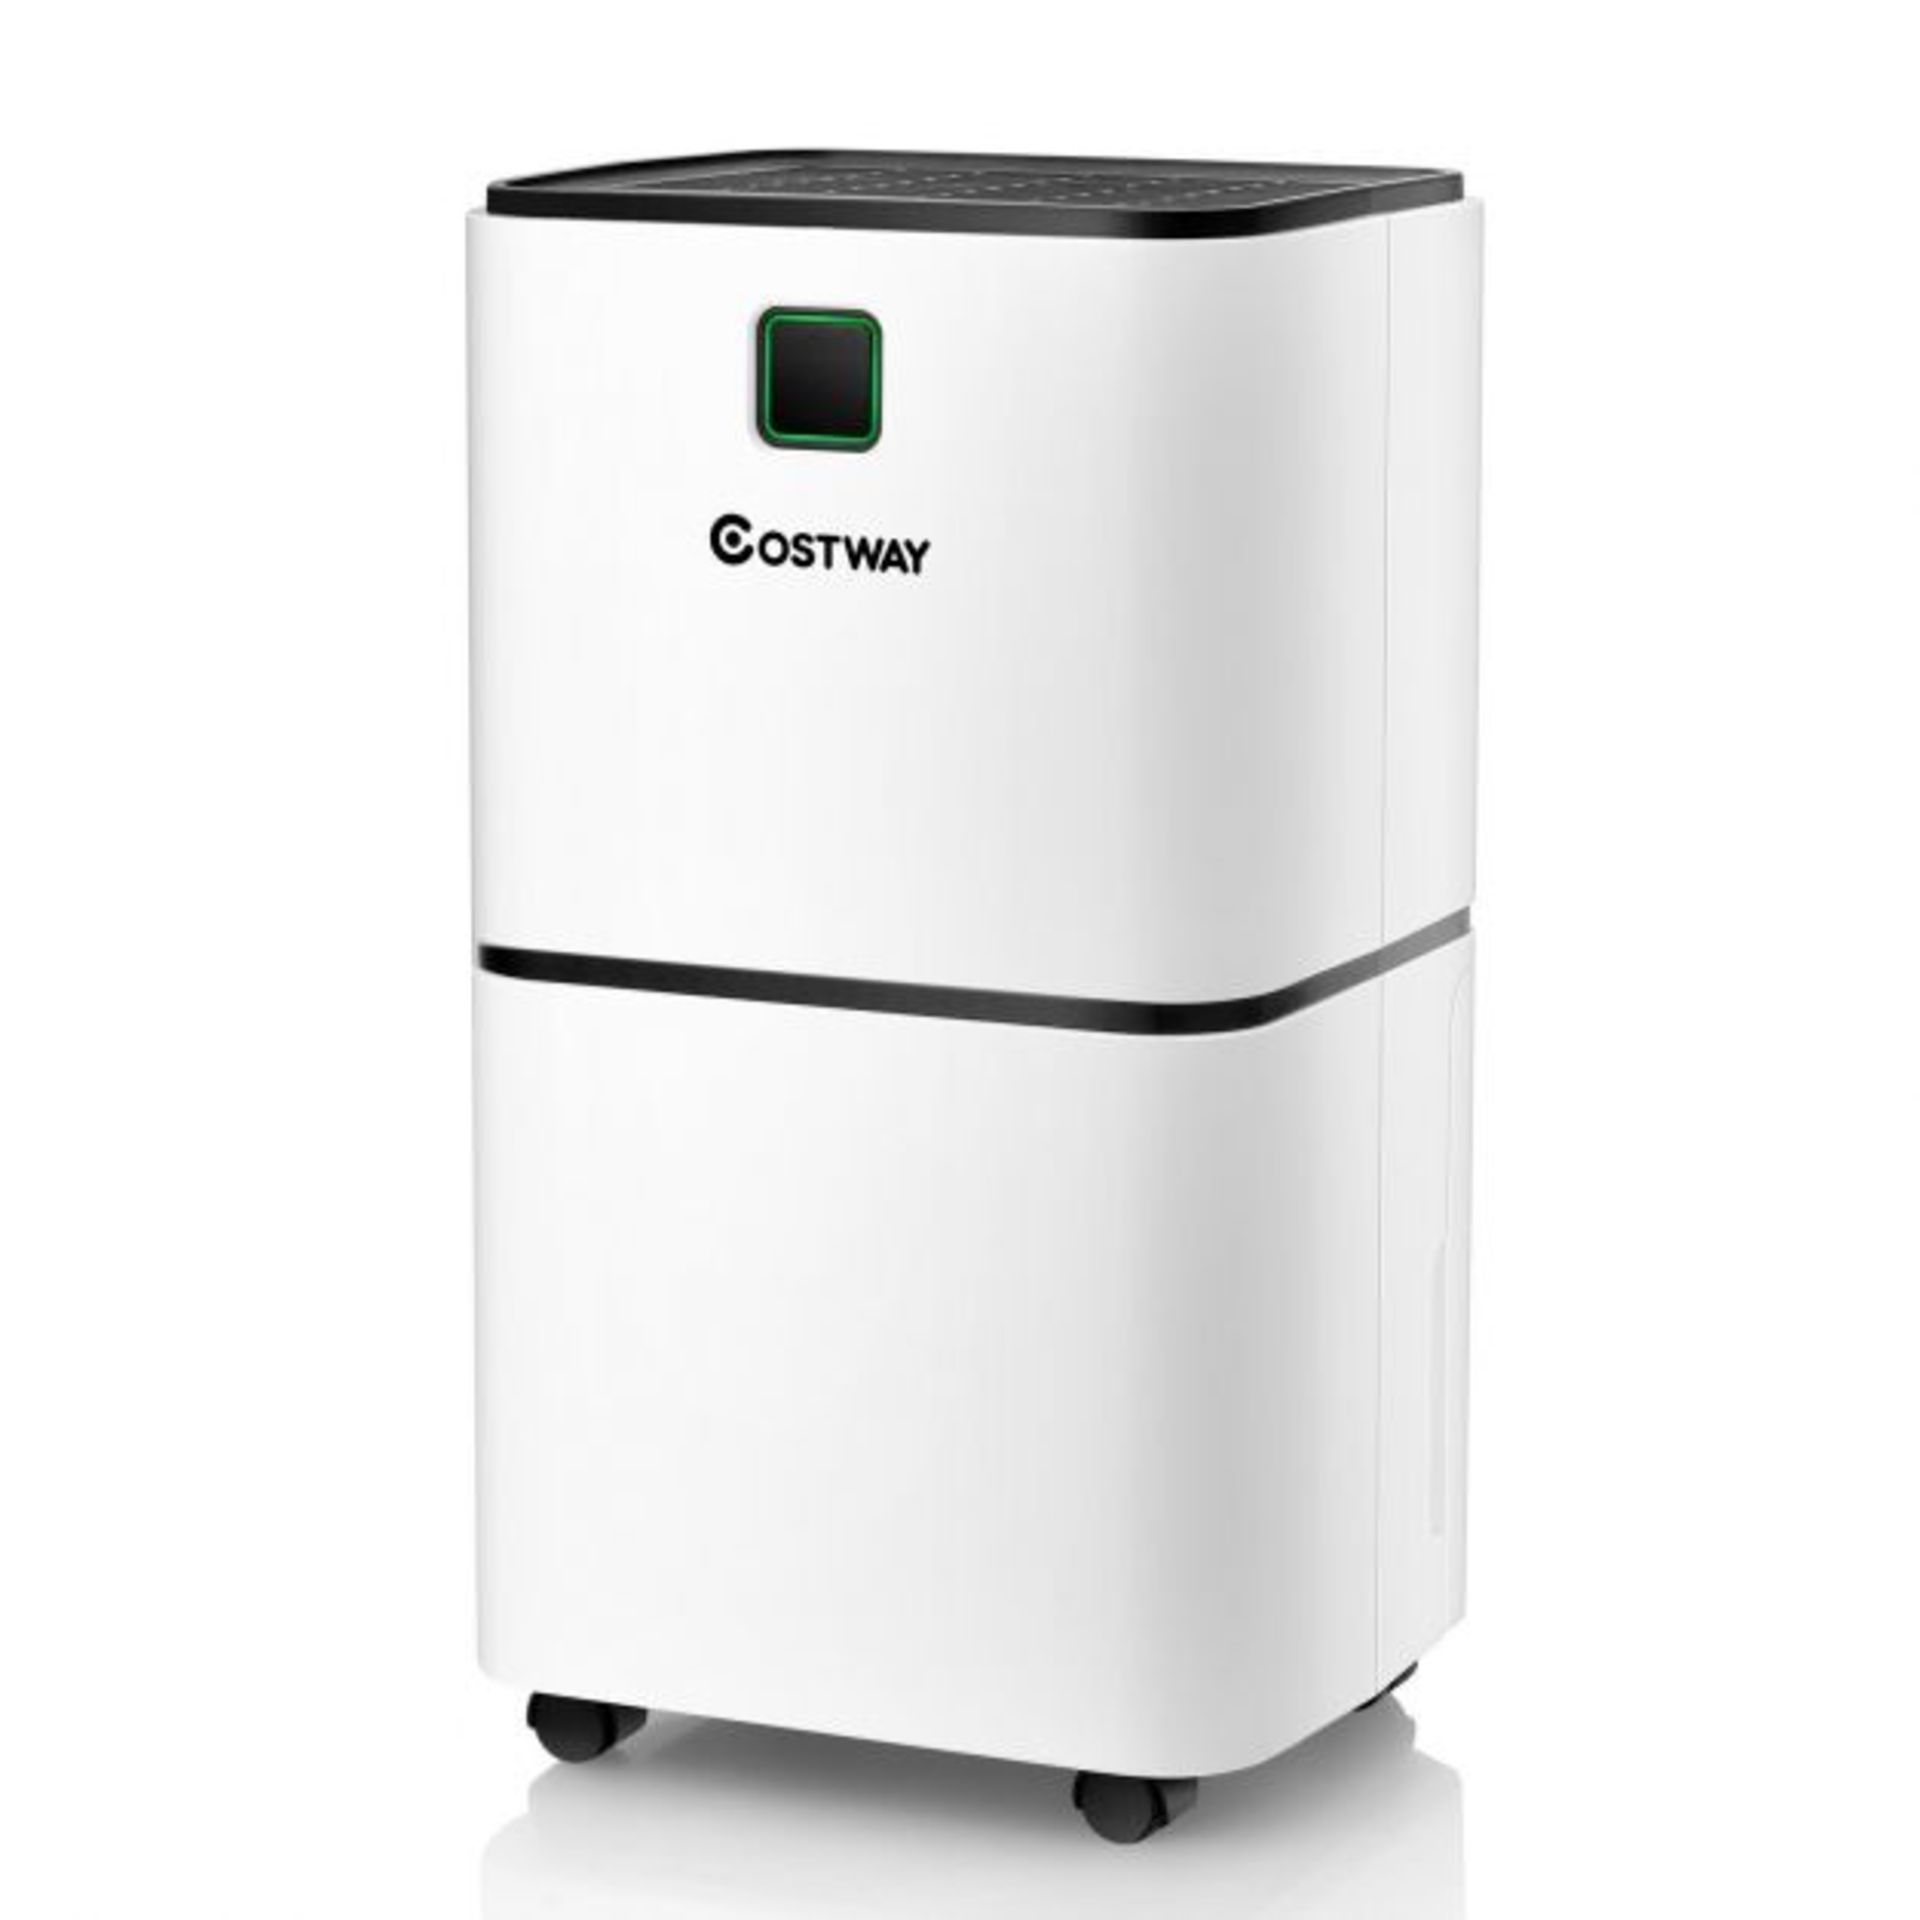 12L Ultra-quiet, Portable, Electric Dehumidifier with 3 Modes. - SR35. Designed with a low-energy